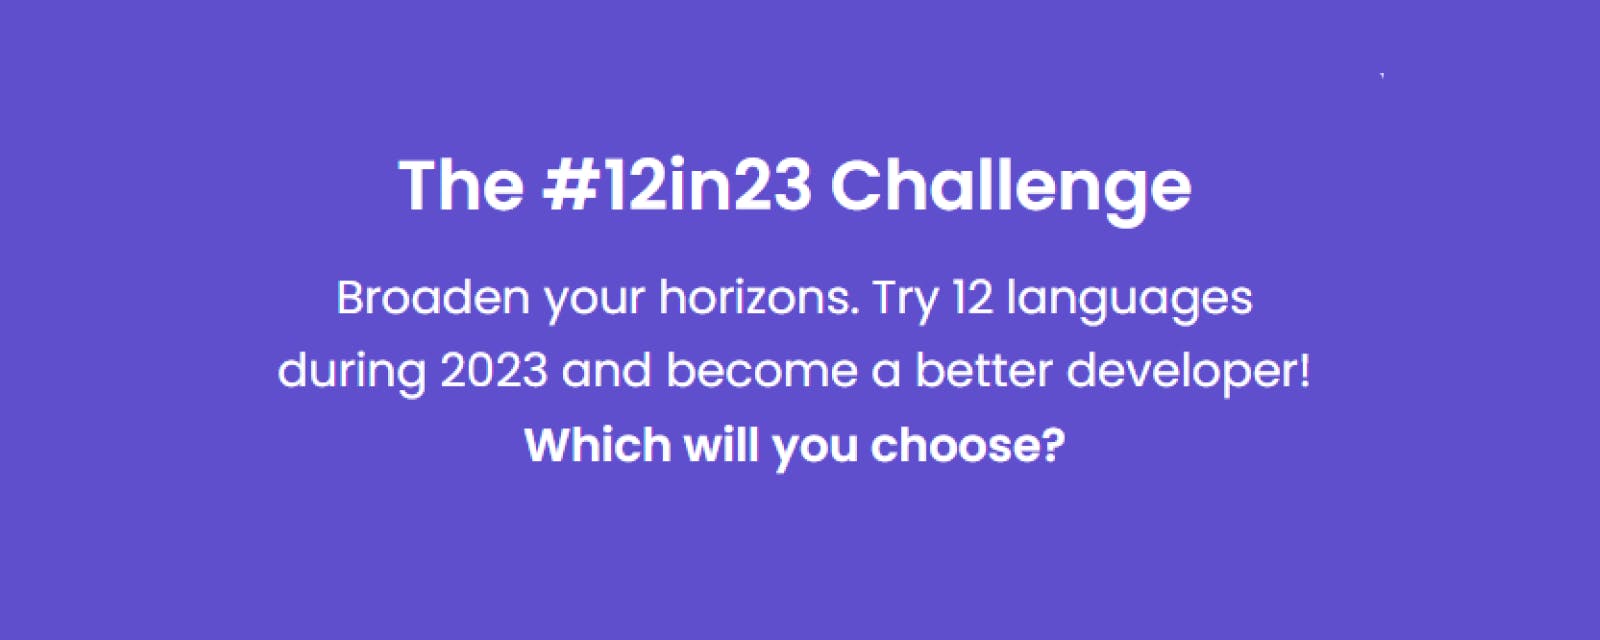 12in23 Challenge - Getting Started